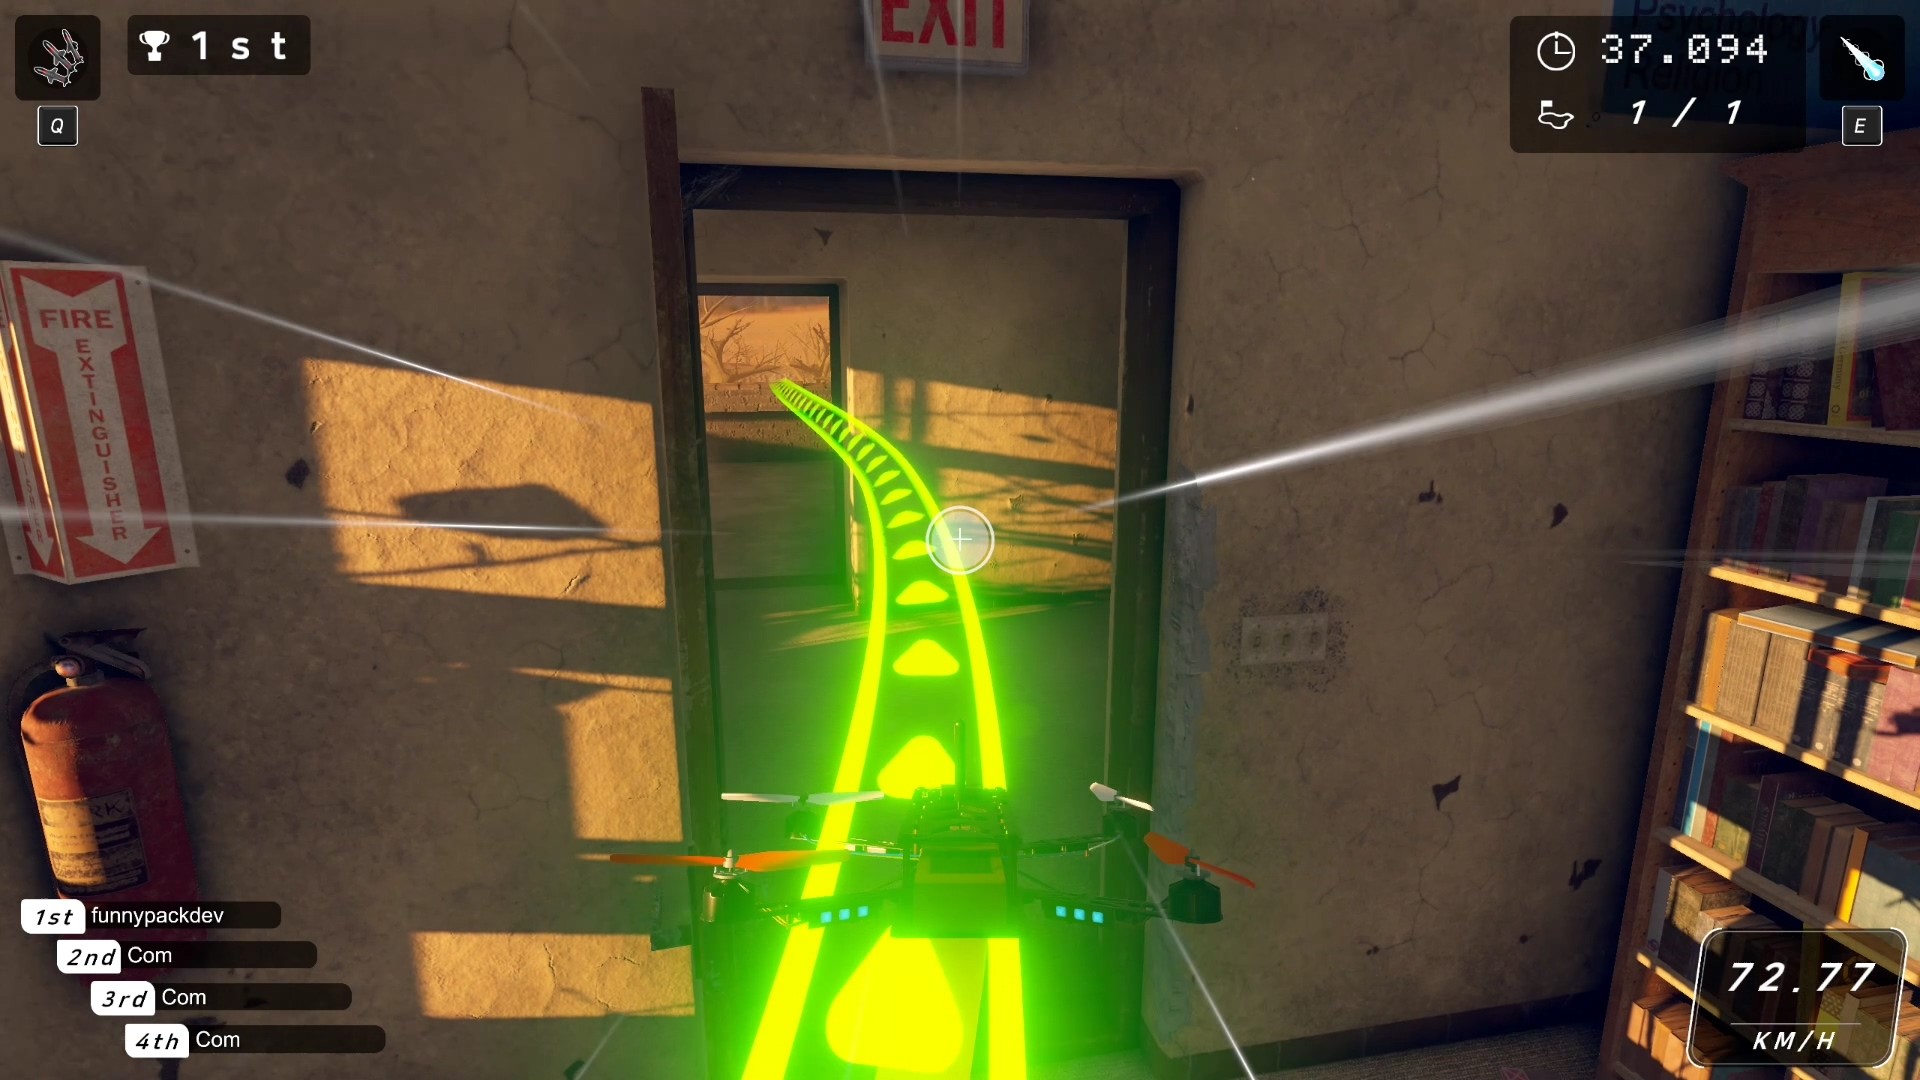 Drone Racer on Steam